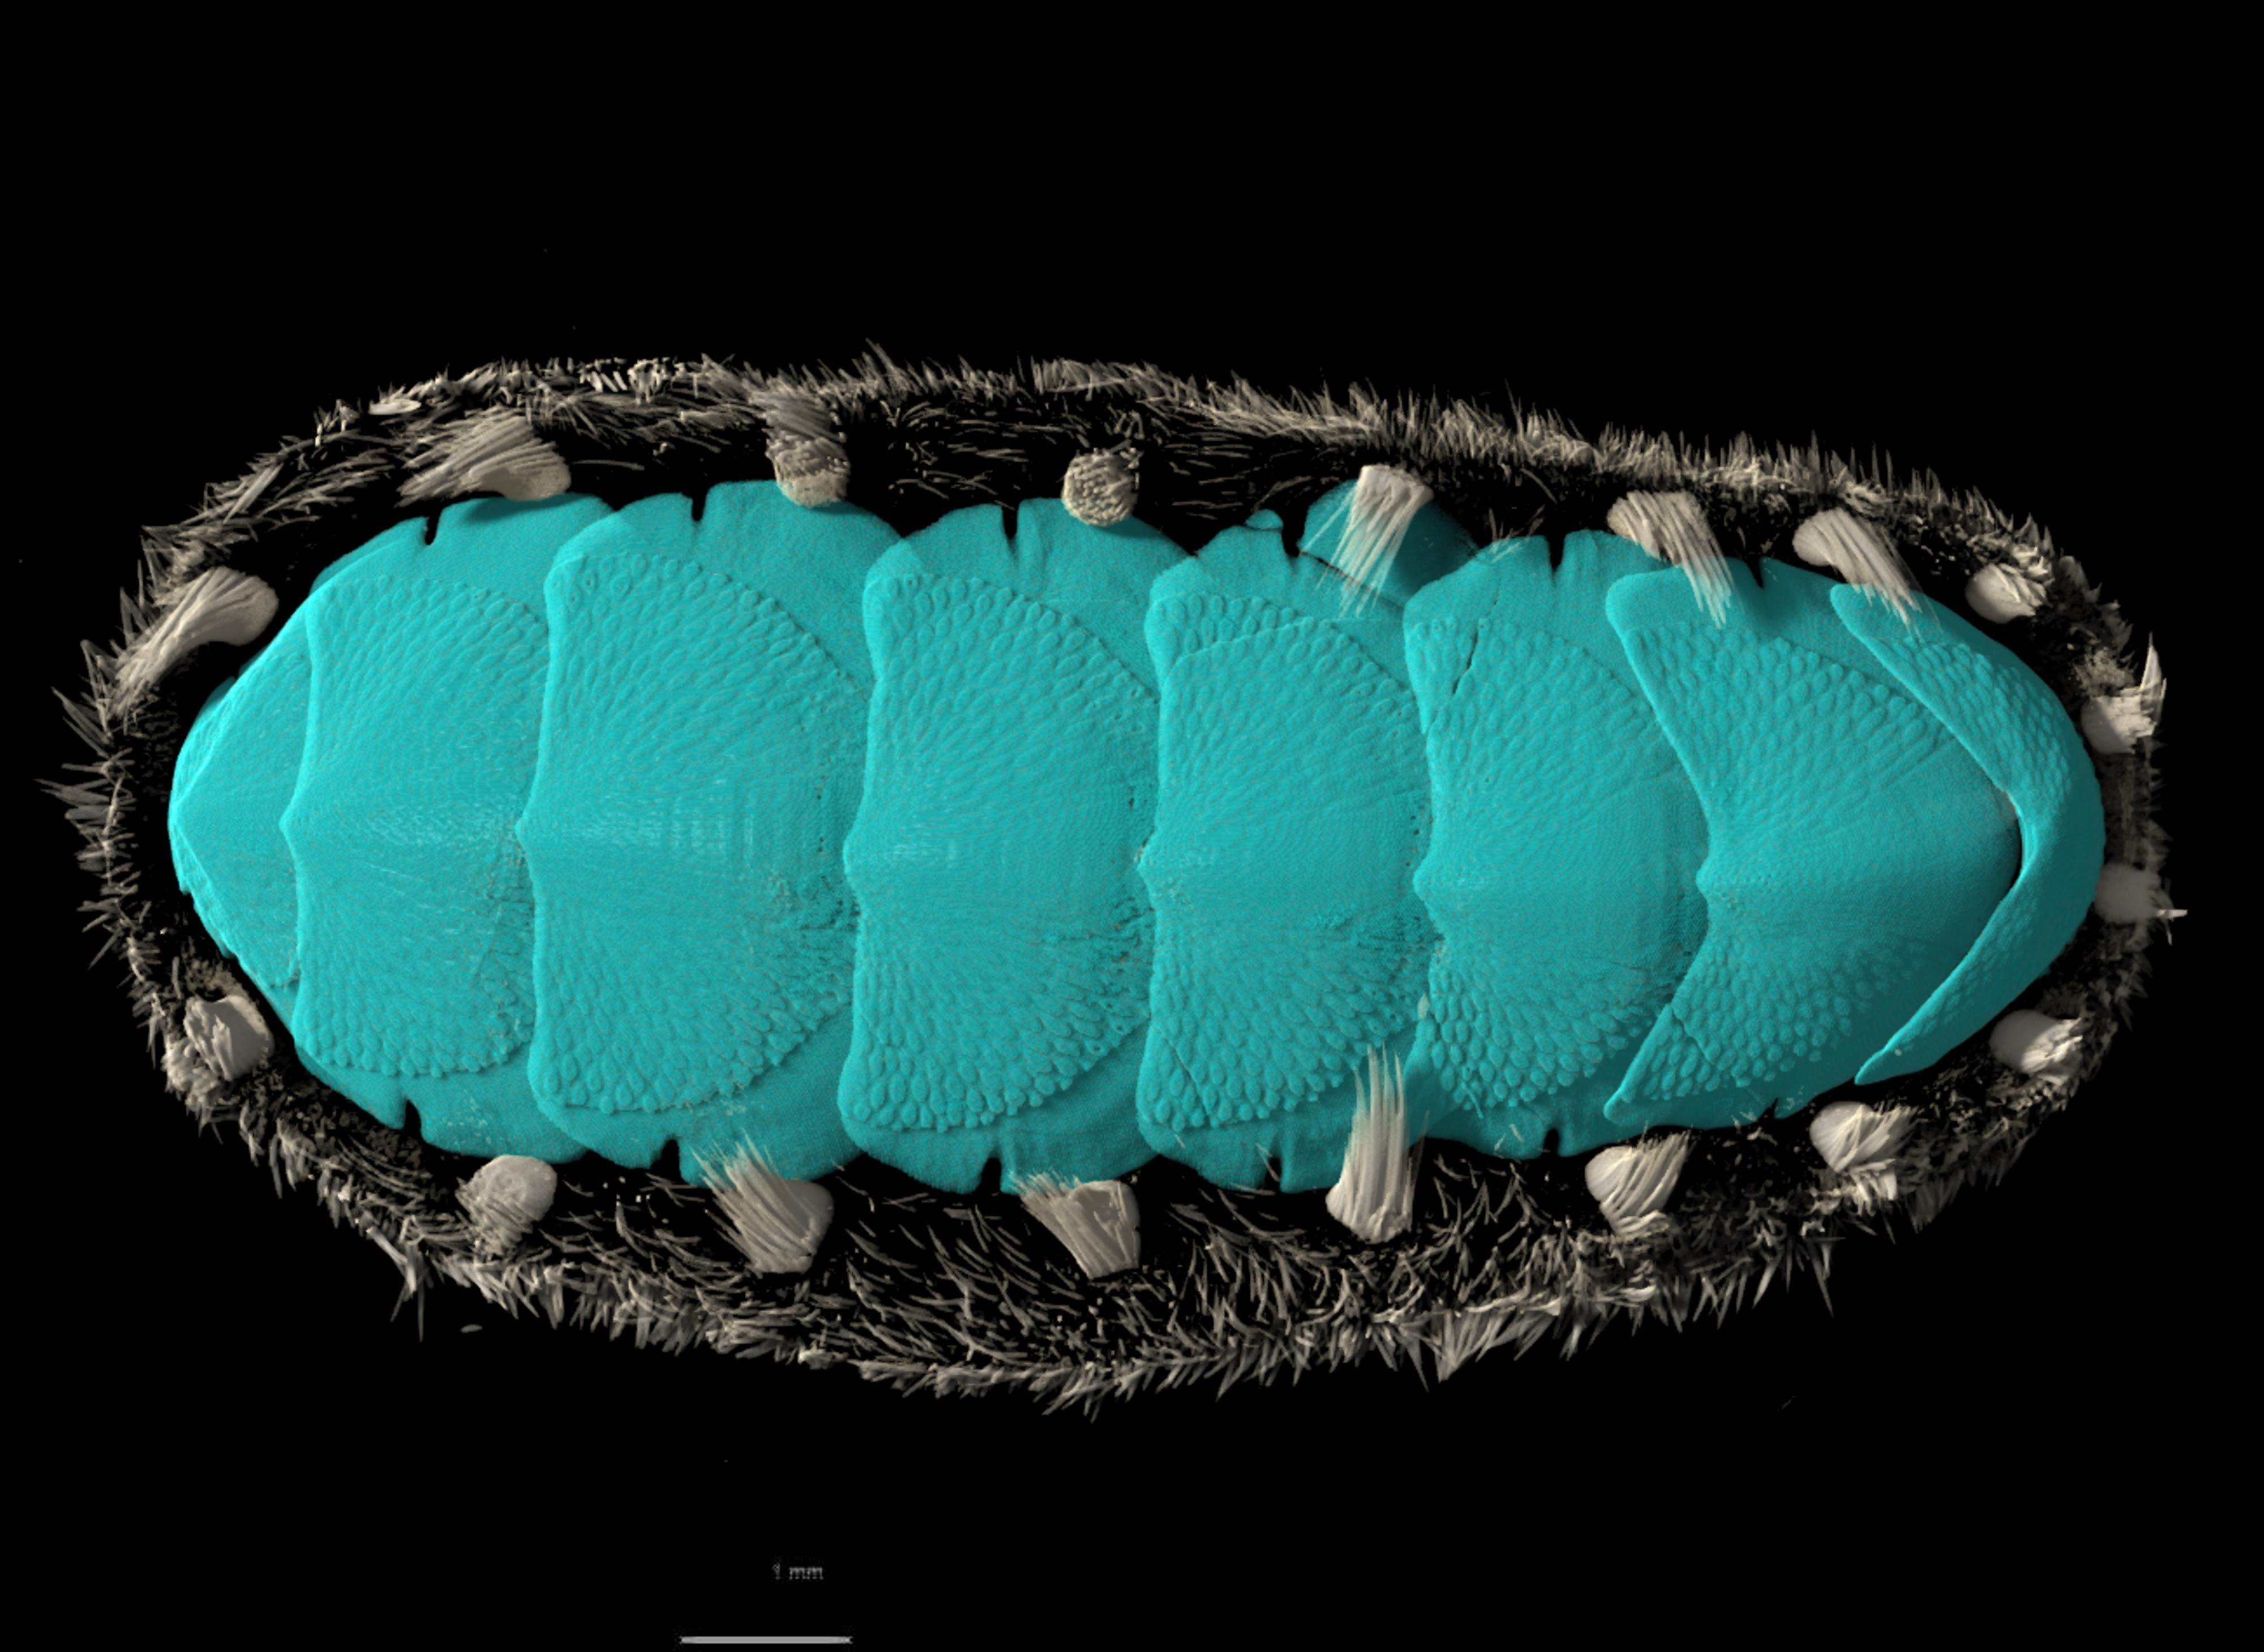 BE-RBINS-INV HOLOTYPE MT.3783 Acanthochiton oblongus MICROCT XRE DORSAL.jpg